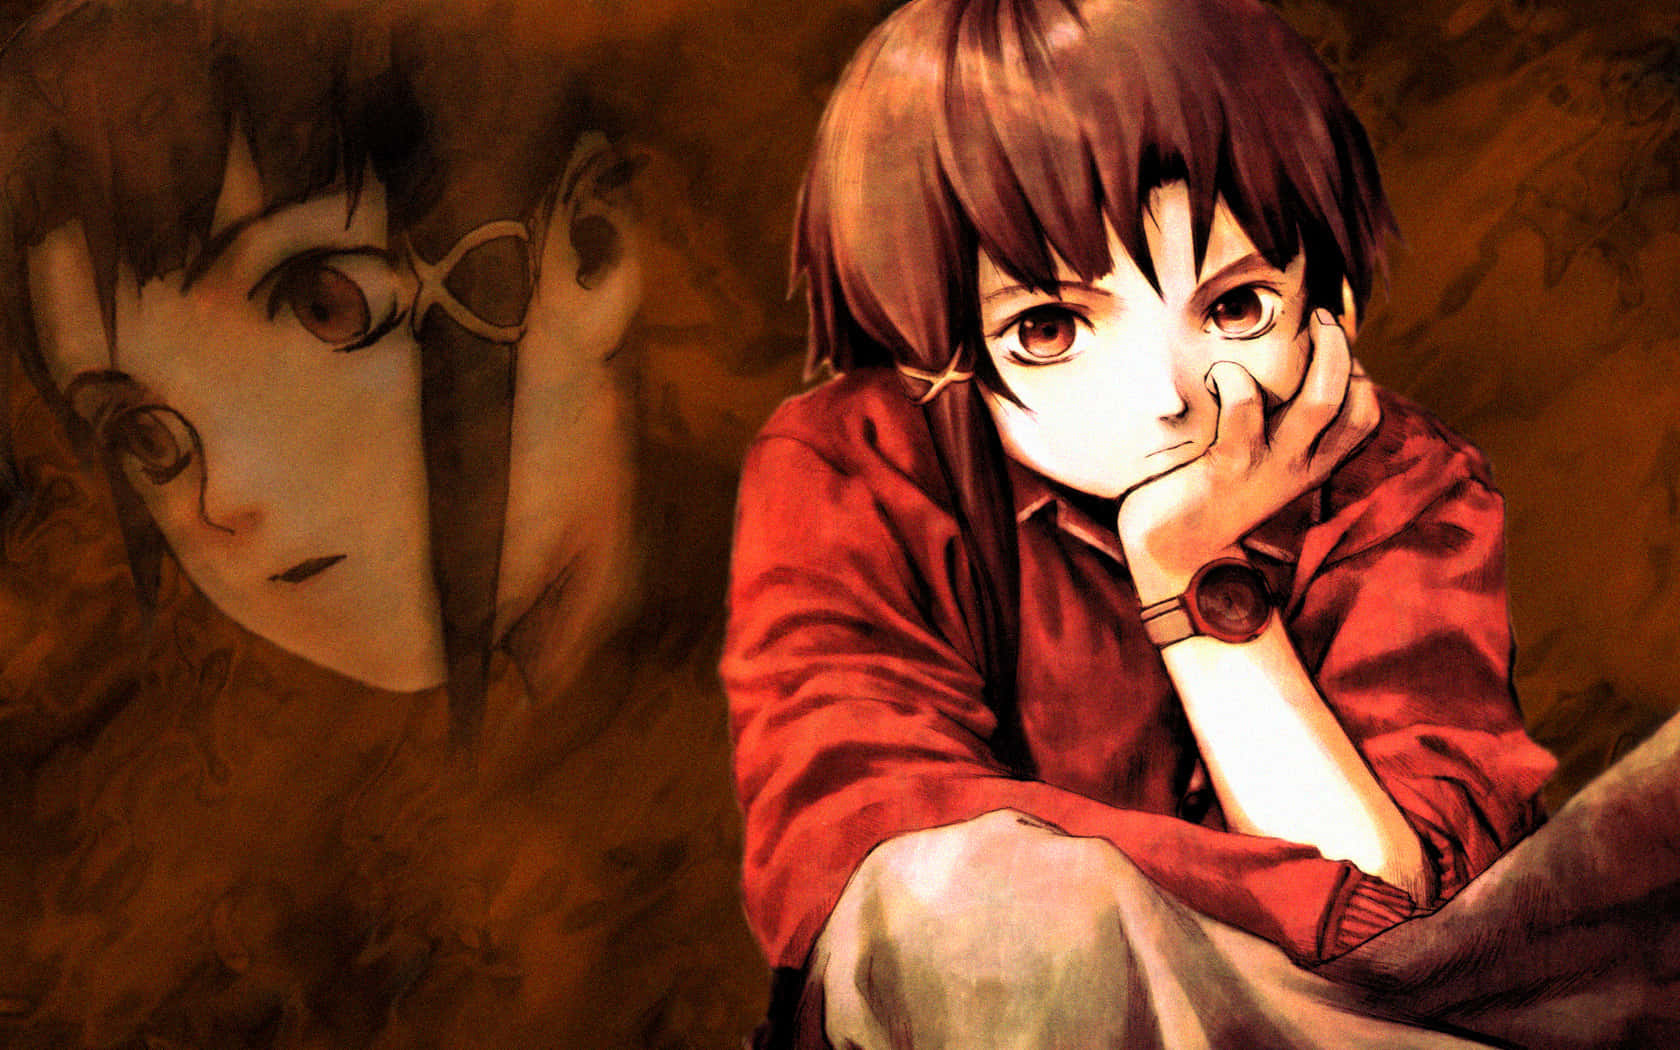 “exploring The Digital World With Serial Experiments Lain” Background